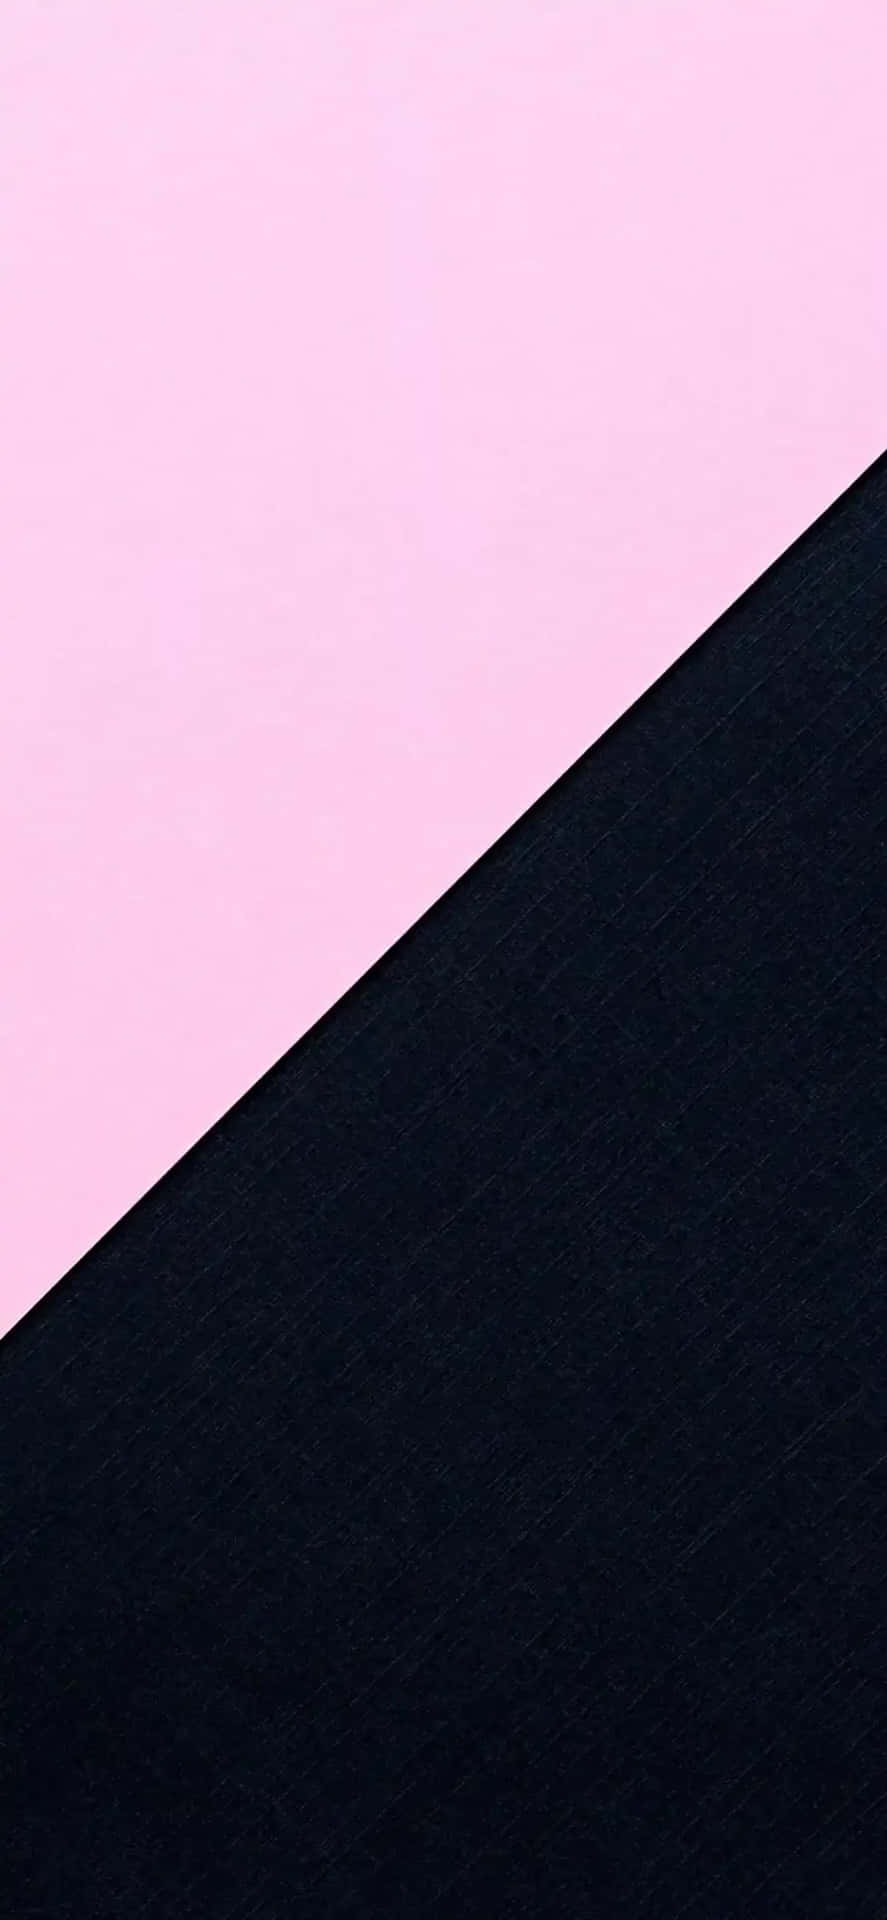 Shades of pink and black blend together in harmony Wallpaper